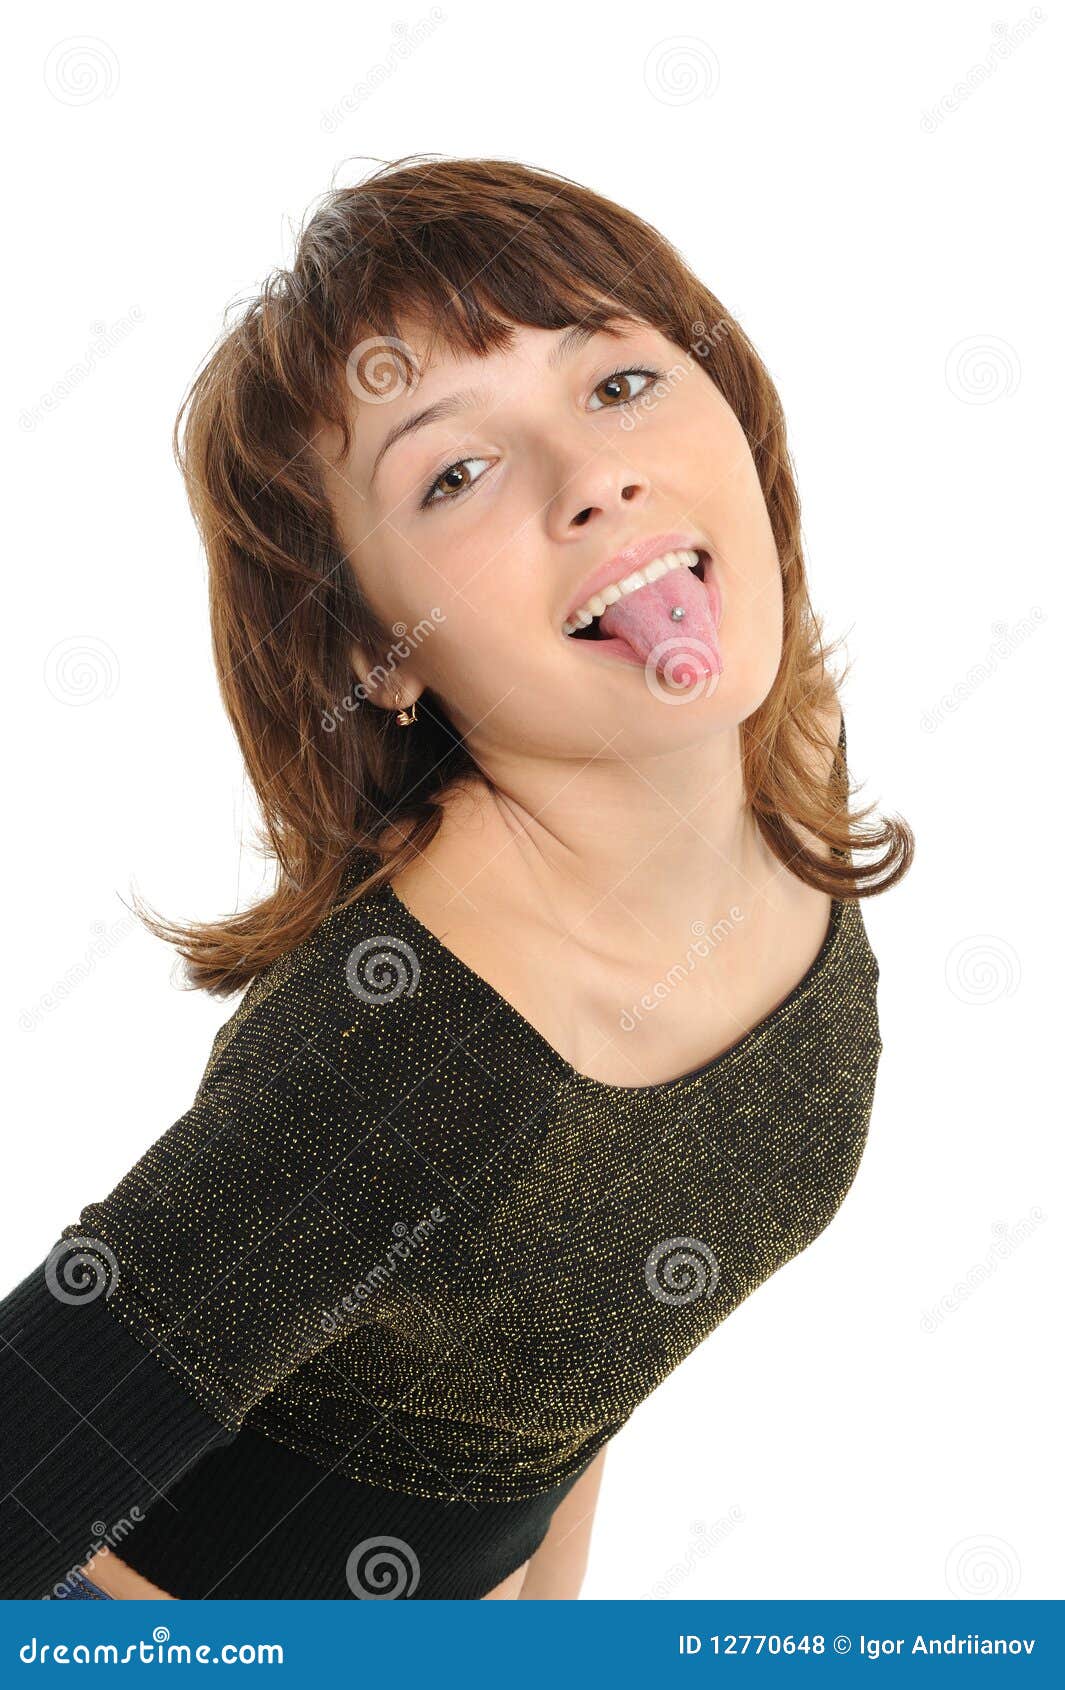 clipart of girl sticking out her tongue - photo #36